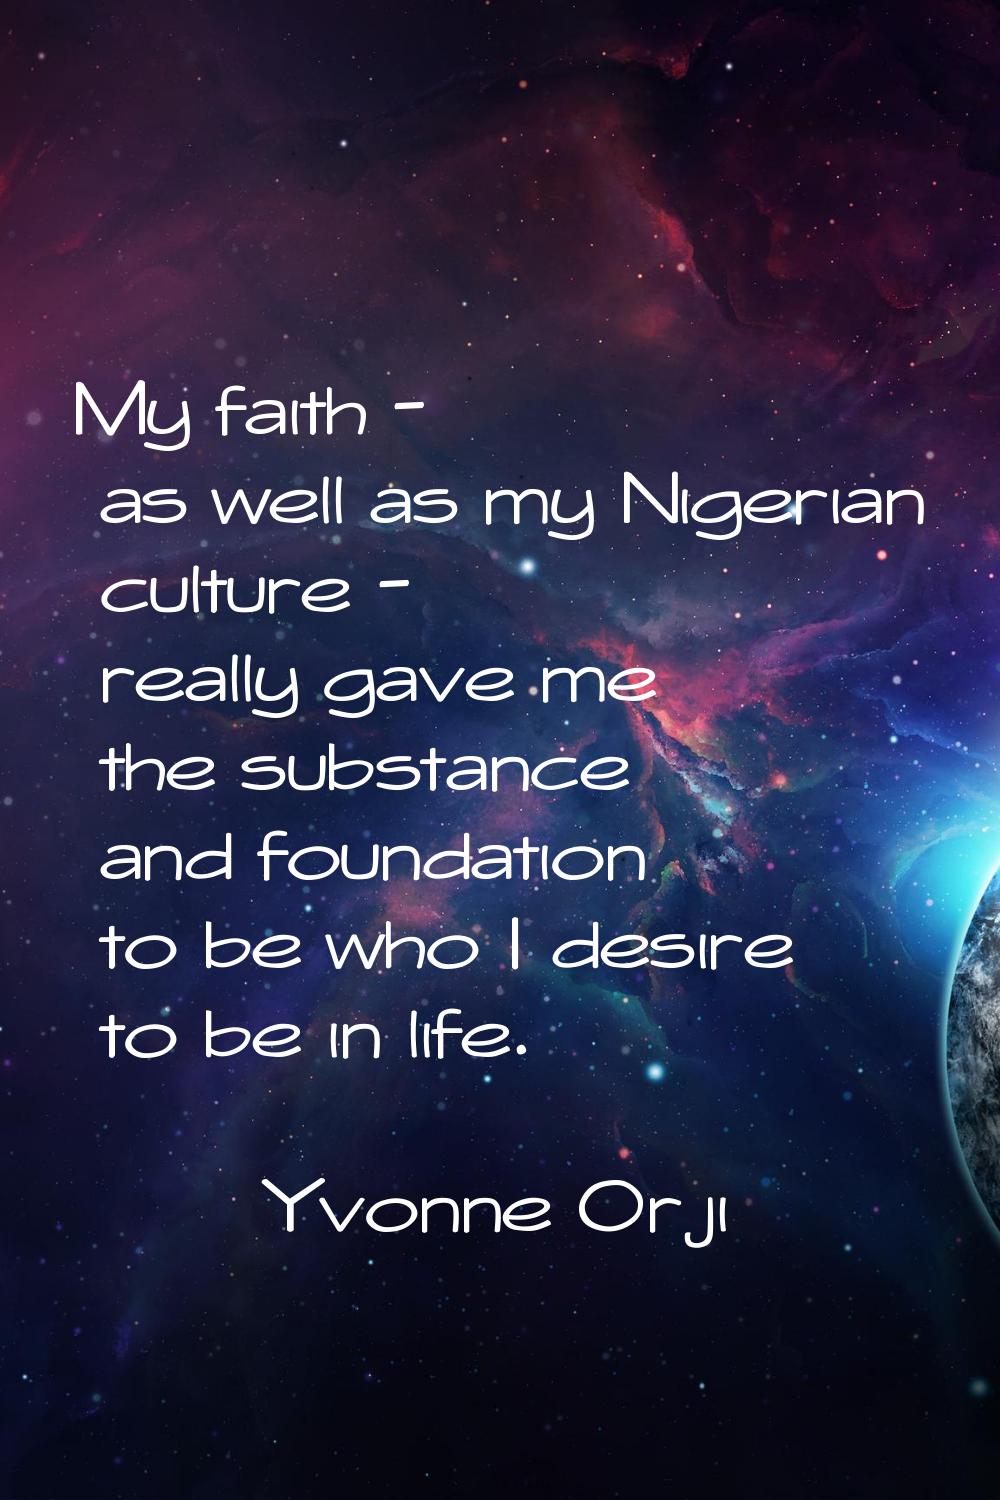 My faith - as well as my Nigerian culture - really gave me the substance and foundation to be who I